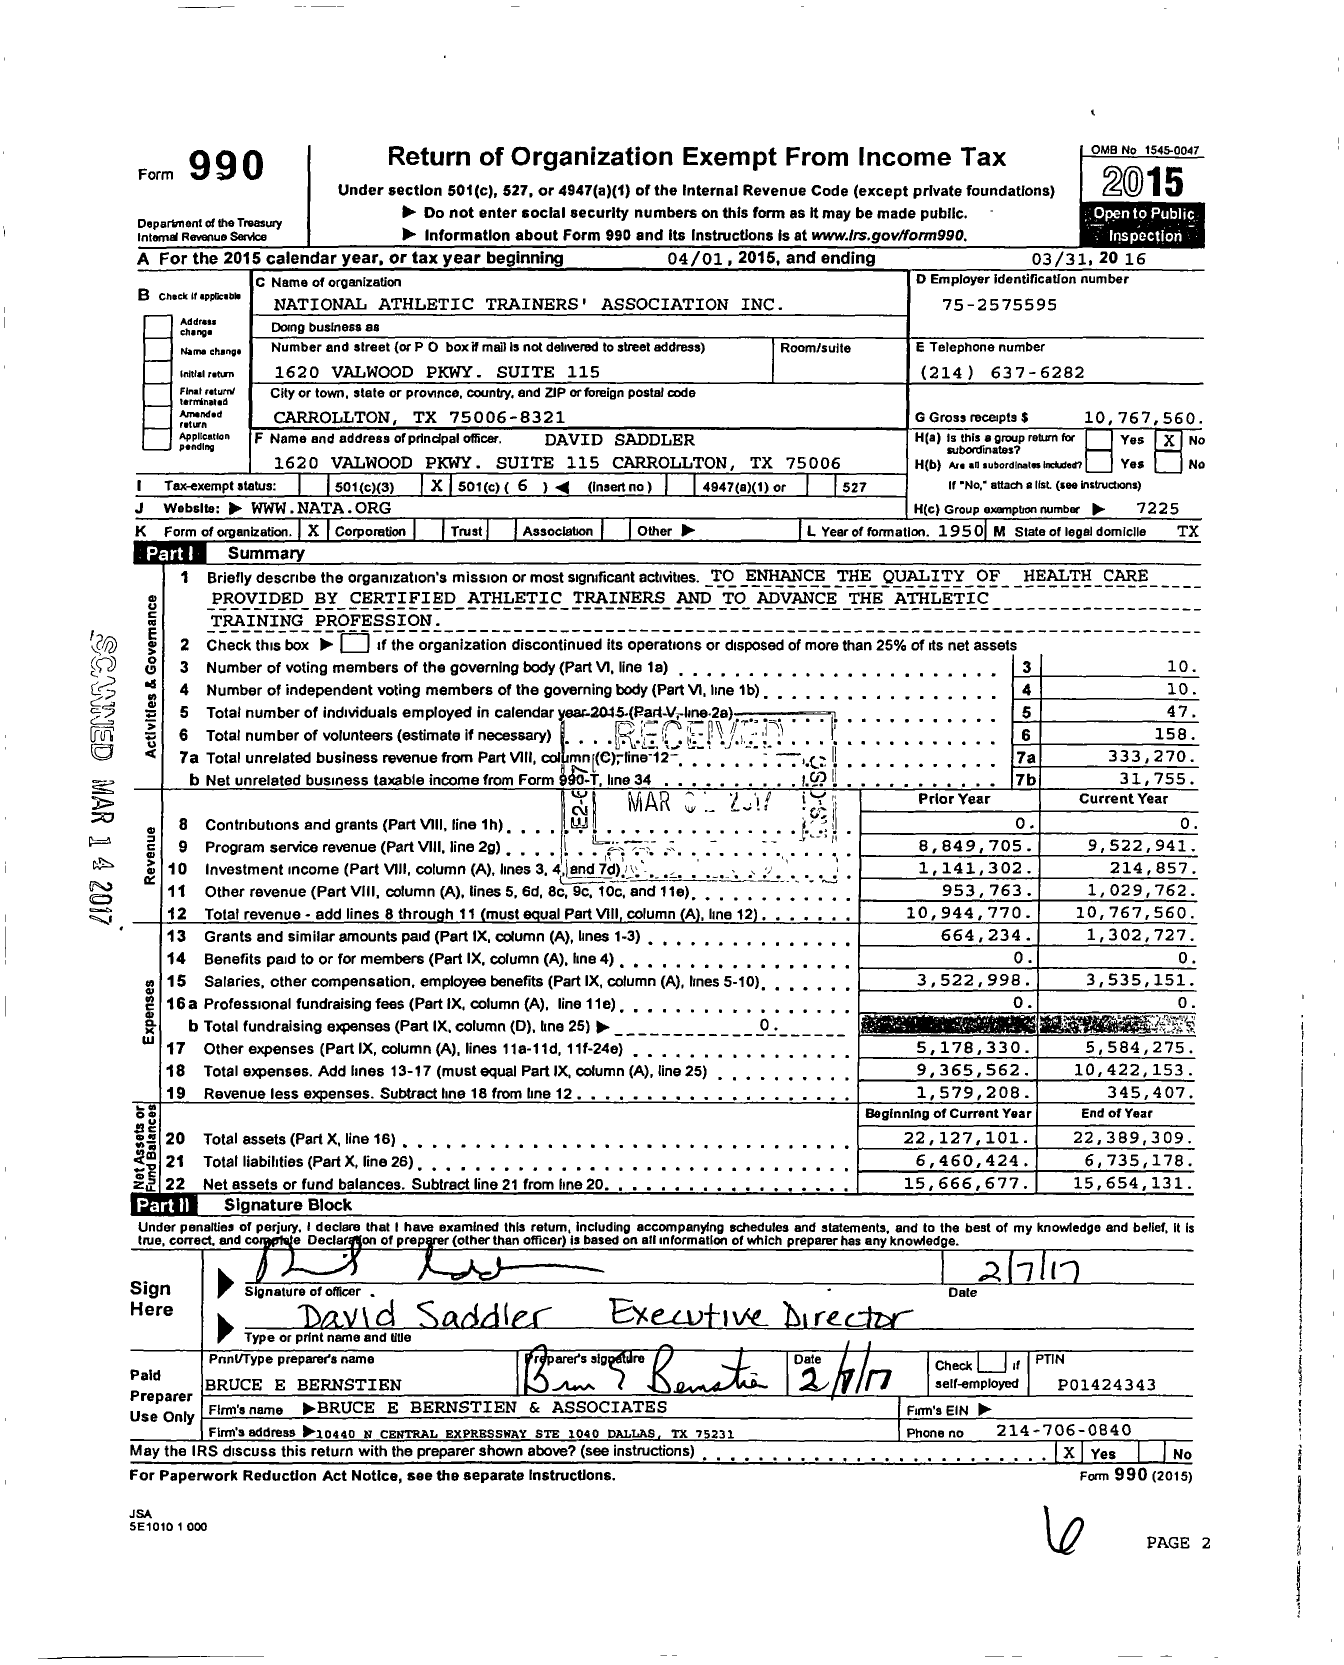 Image of first page of 2015 Form 990O for National Athletic Trainers' Association (NATA)